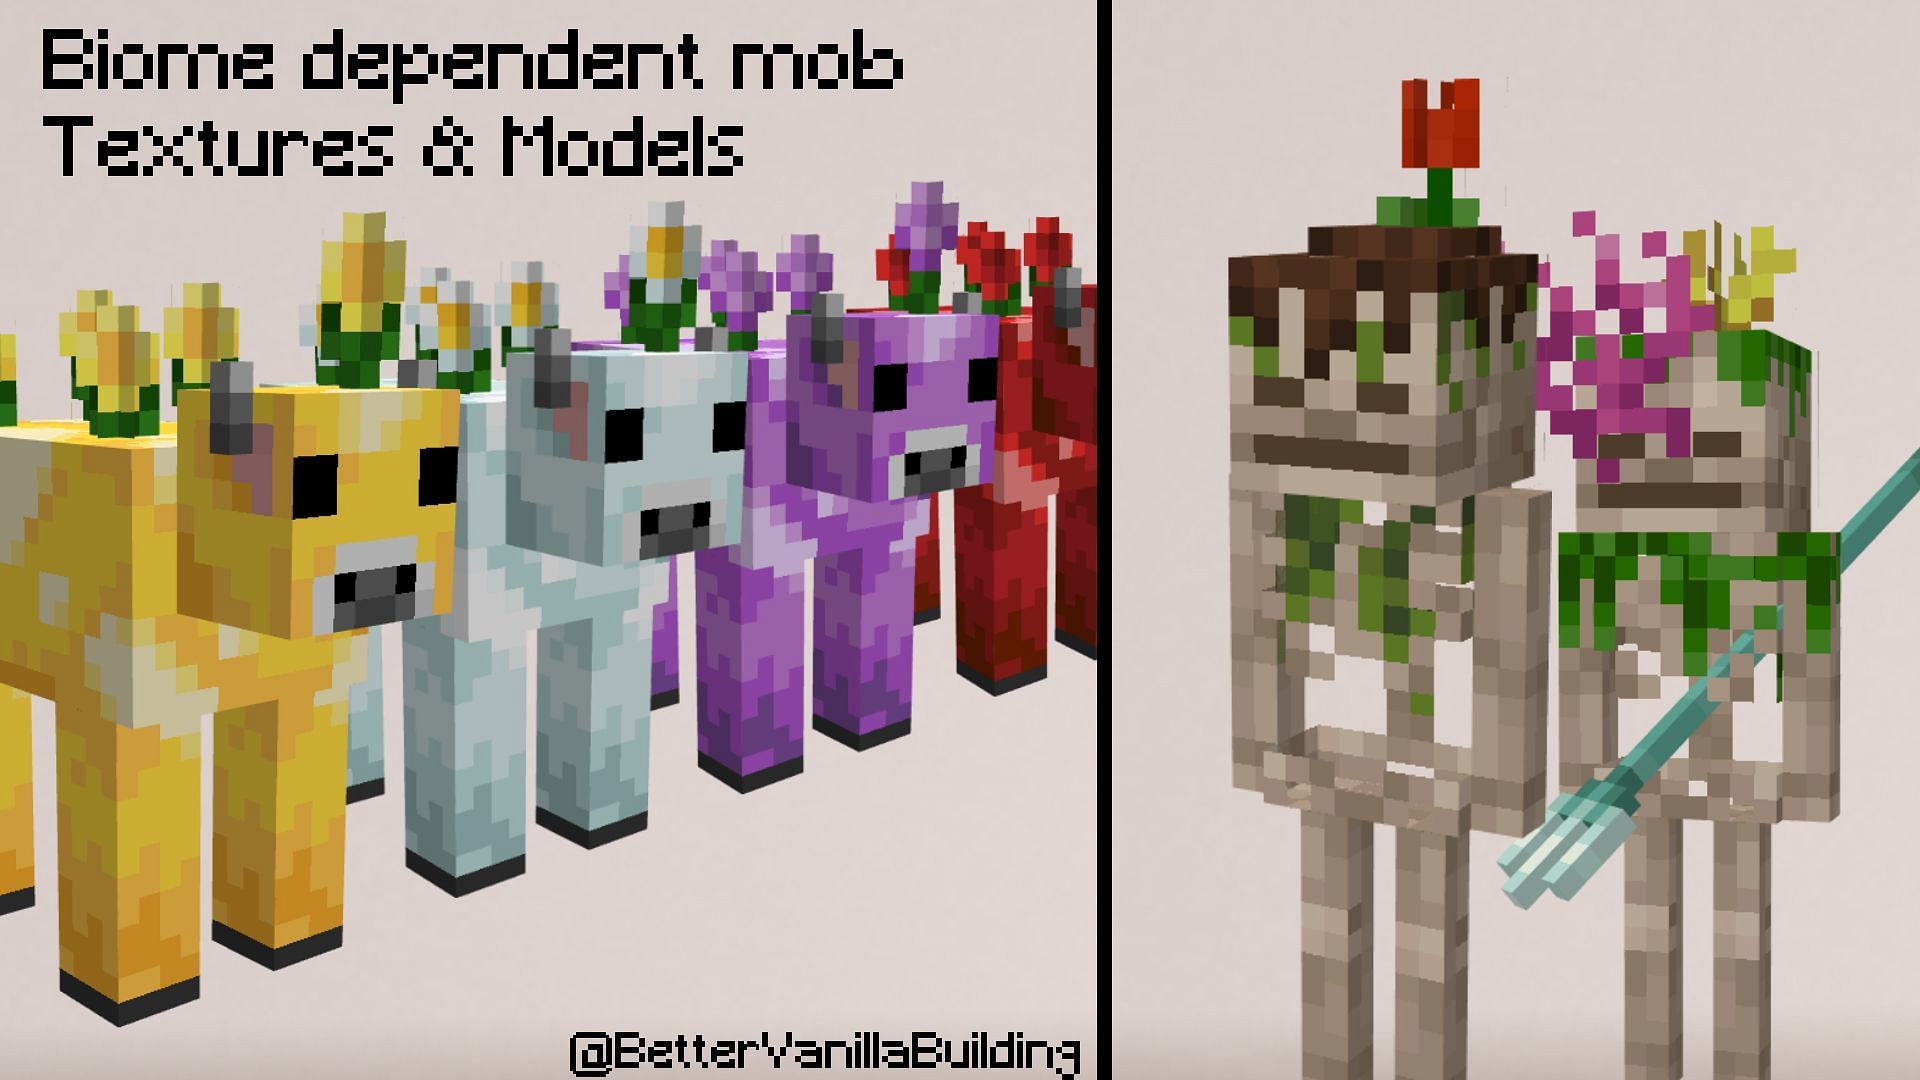 Biome-specific mobs are the tip of the iceberg for Better Vanilla Building (Image via Mojang)